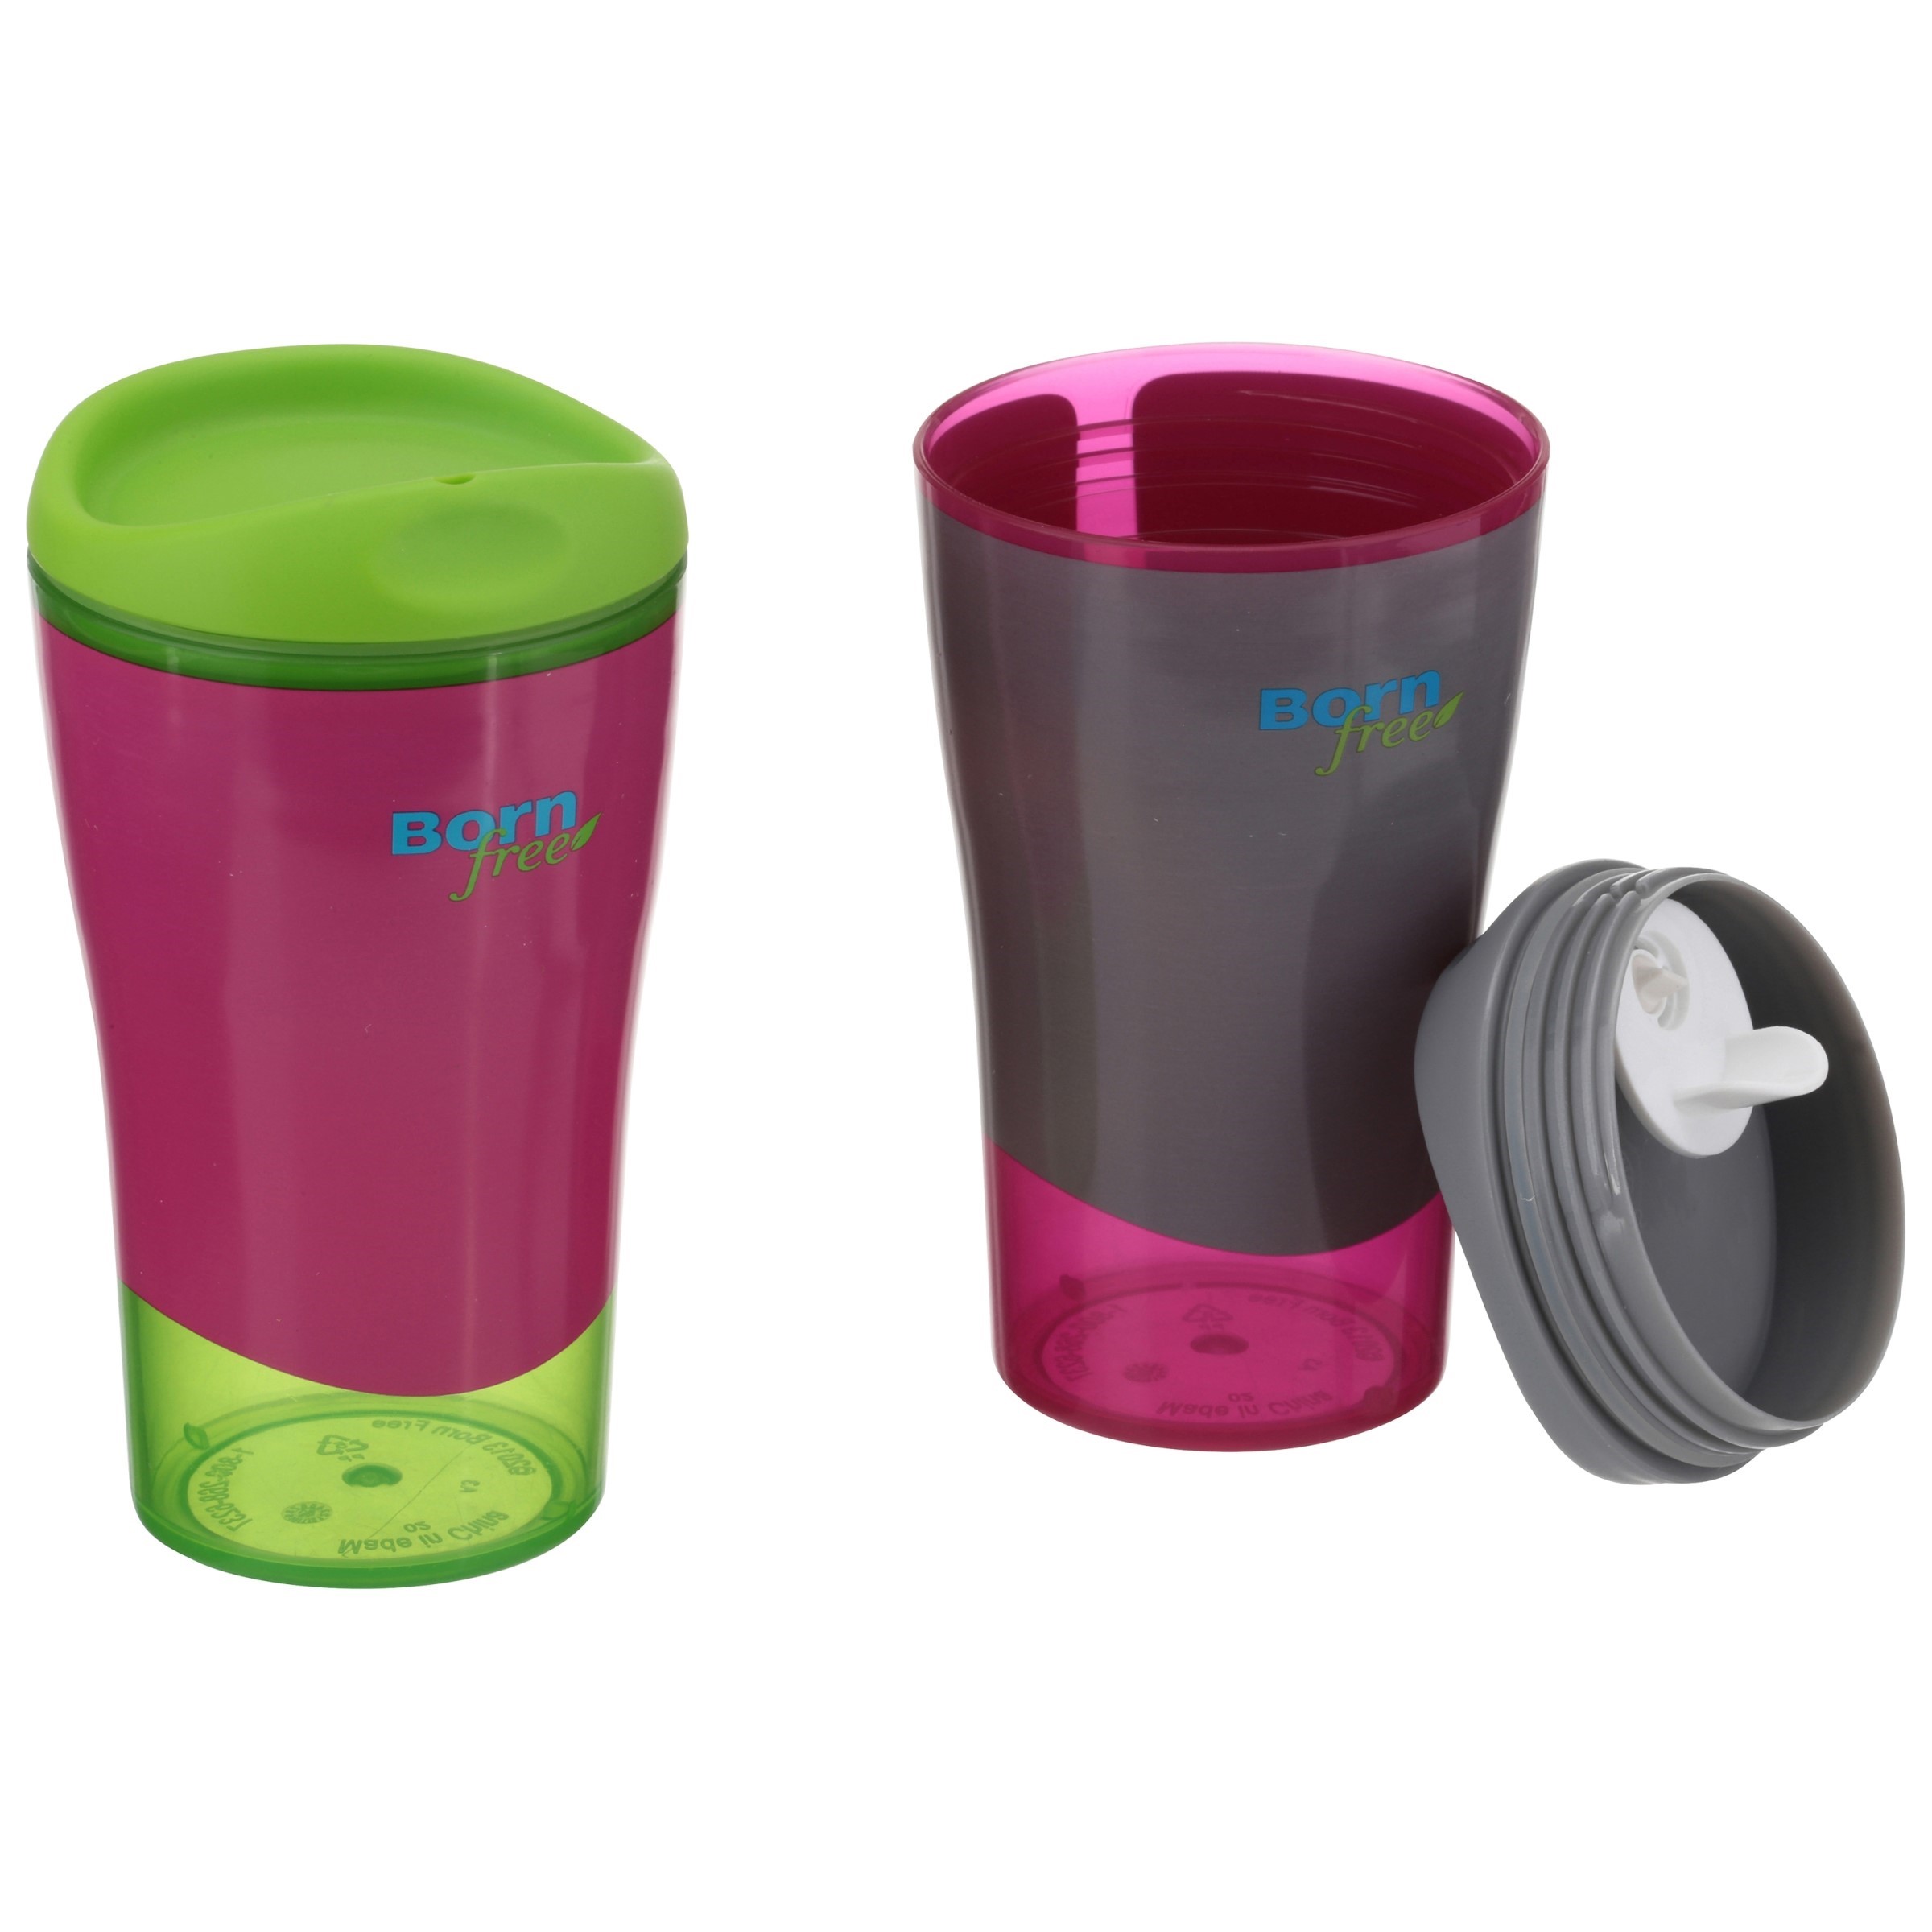 Frozen Sip Around Spoutless Cup - 2 Cups in 1 Spoutless for 360 Degrees of  Sipping & Converts to Big Kid's Open Cup